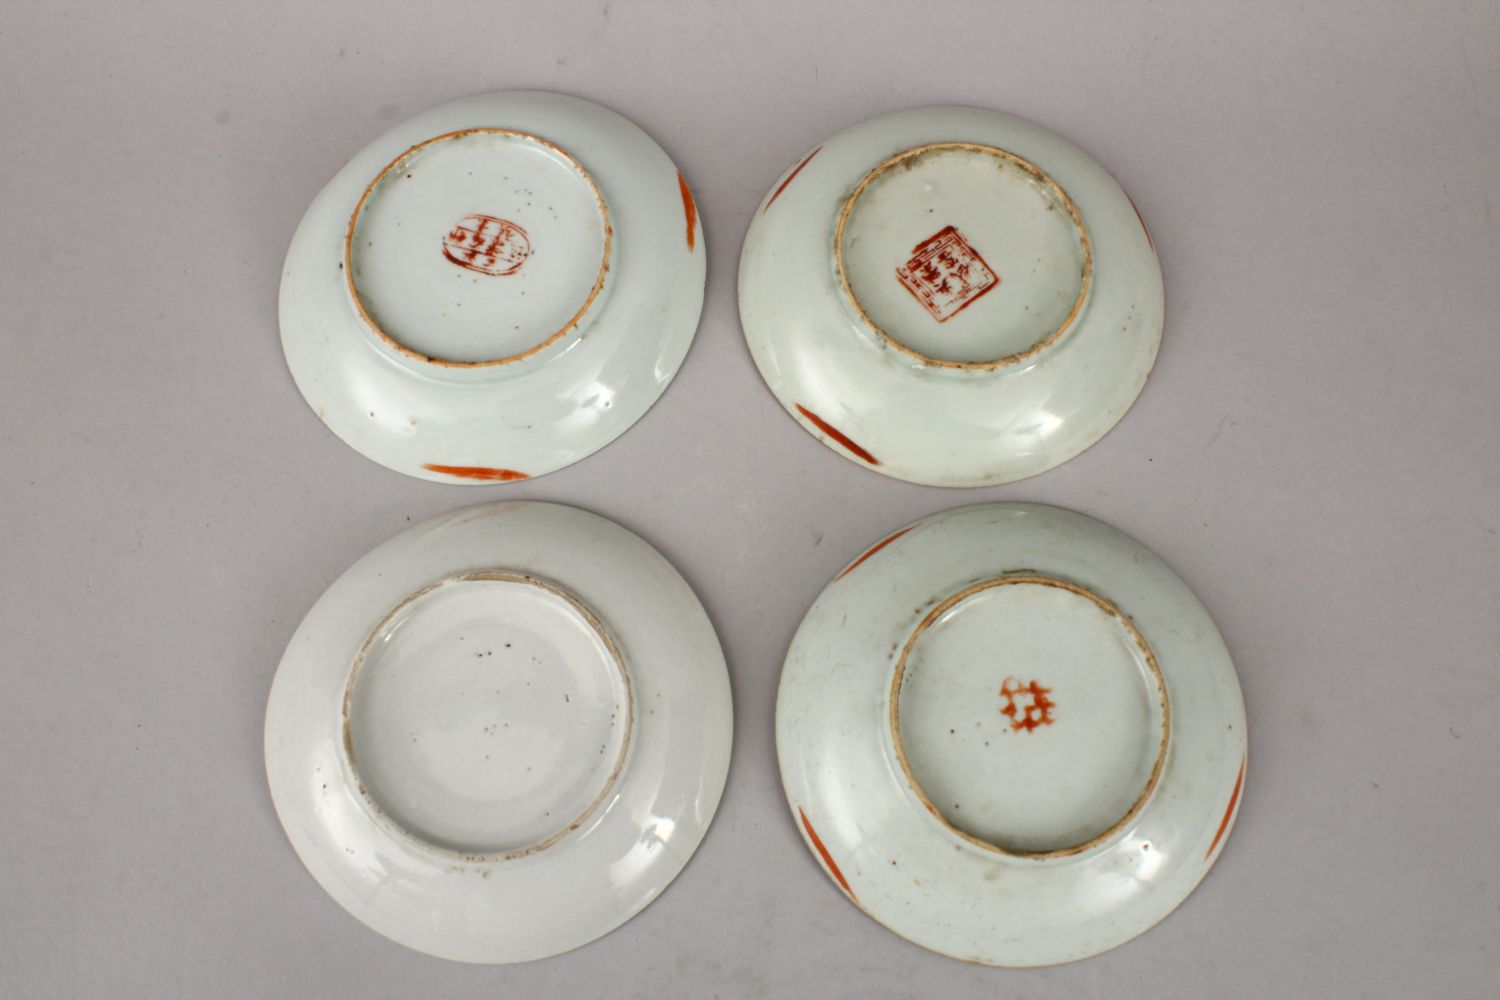 FOUR 19TH CENTURUY CHINESE IRON RED PORCELAIN PLATES, decorate with flora, fruits, bats and symbols, - Image 5 of 5